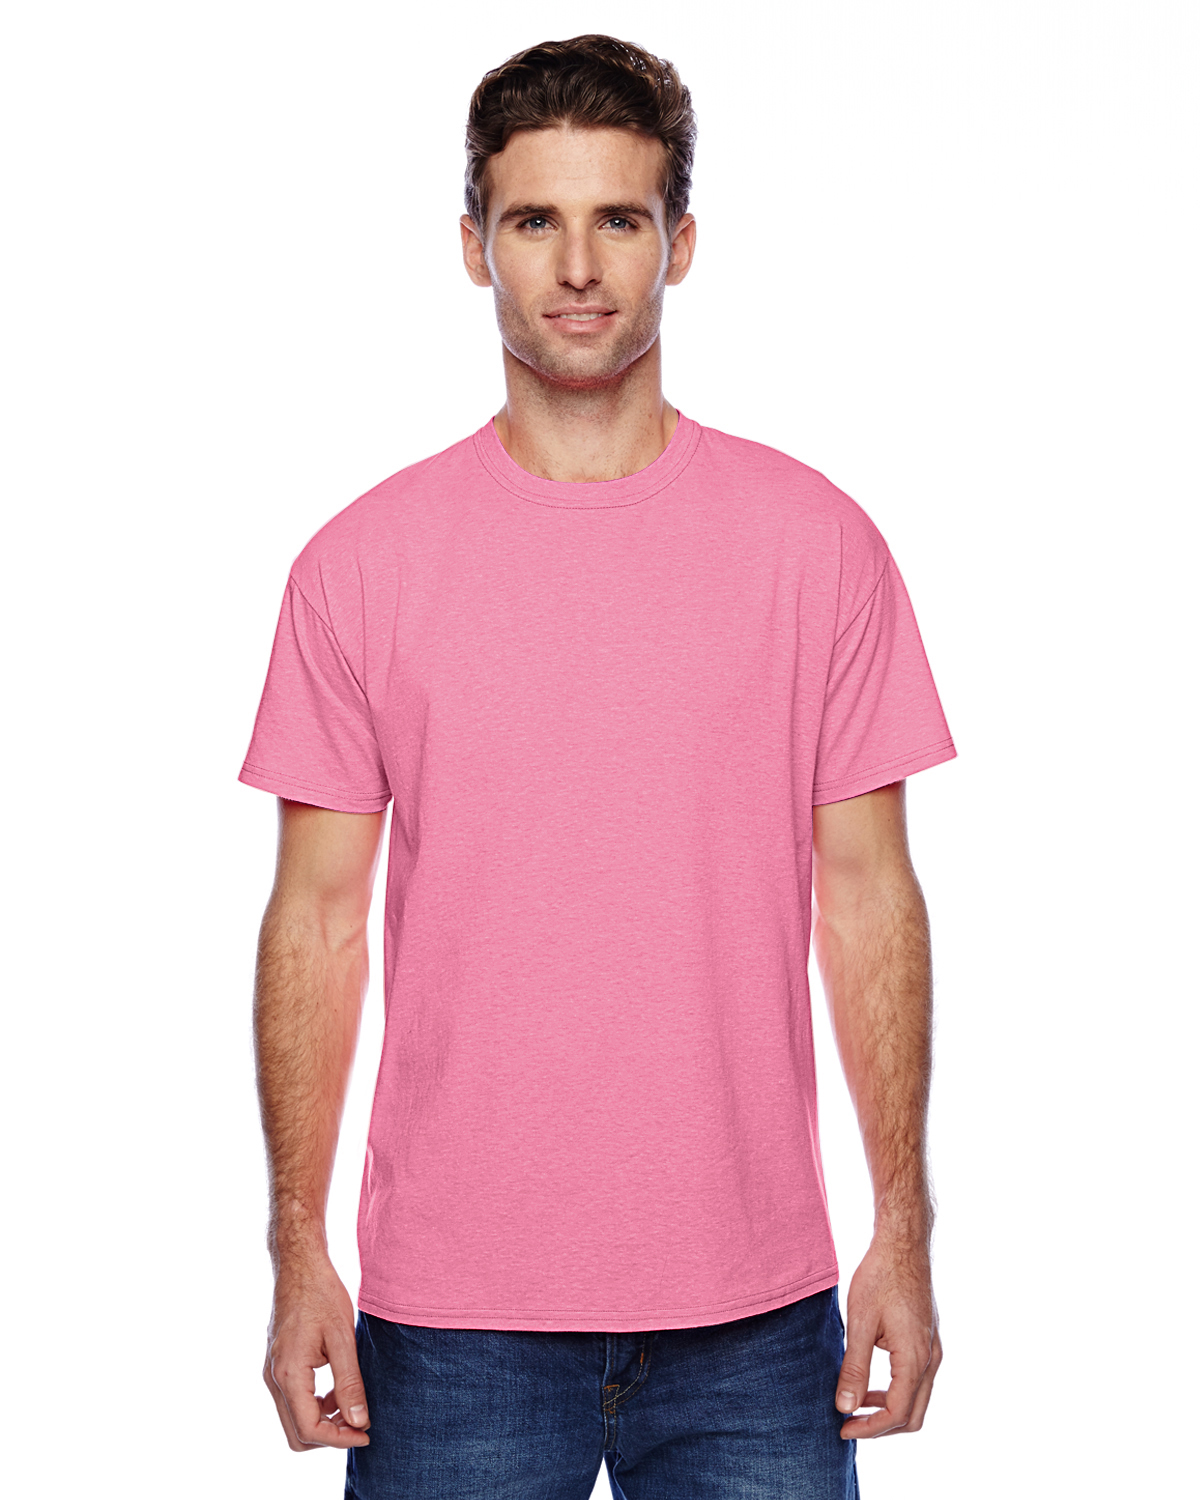 neon pink color t shirt